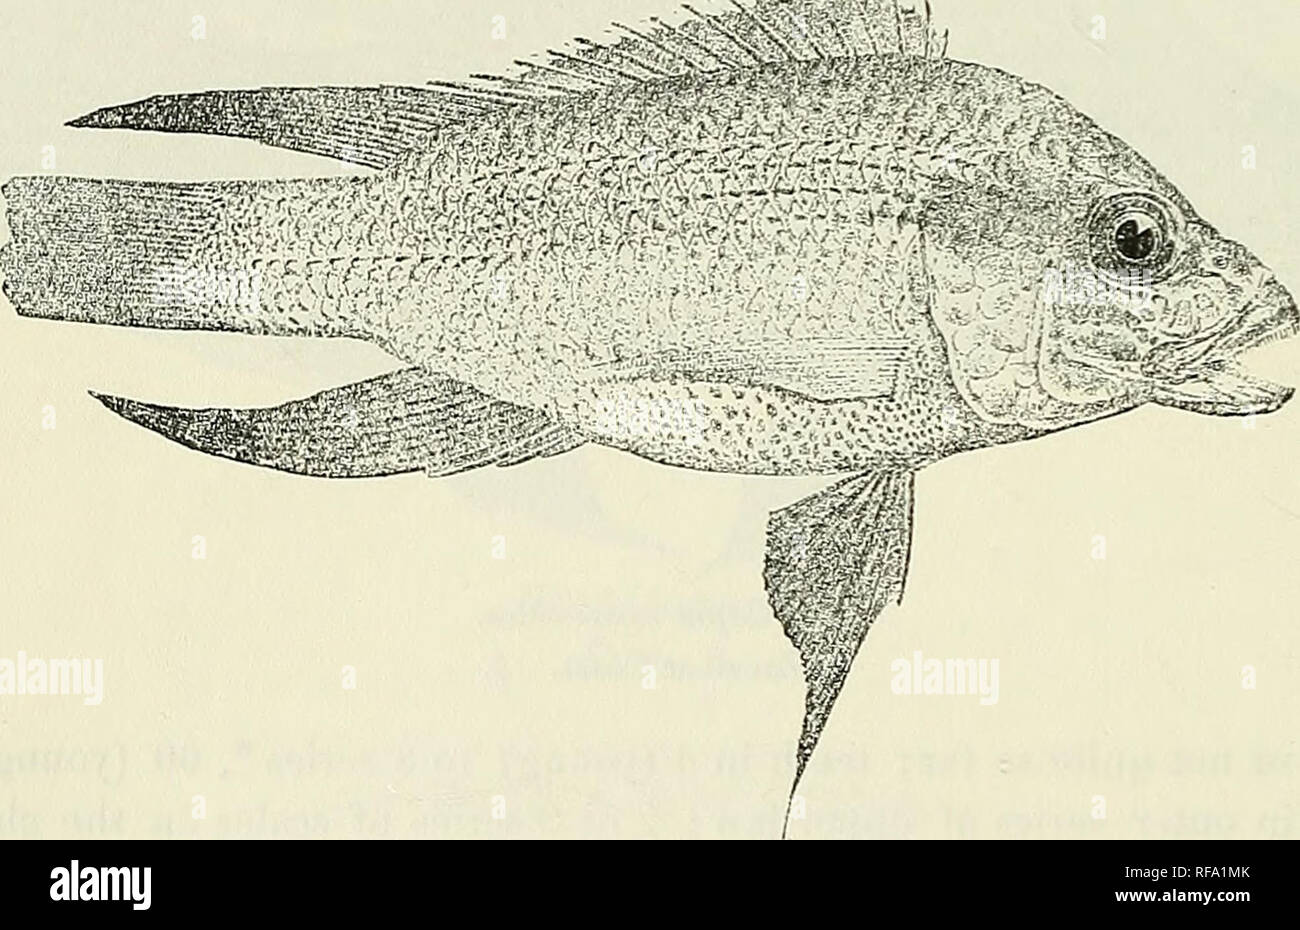 . Catalogue of the fresh-water fishes of Africa in the British Museum (Natural History). British Museum (Natural History); Fishes; Freshwater animals. 156 CICHLID^E. 30—33 -jaEis; Literal lines ,^5. Brownish, olive, or blackish; vertical fins and ventrals blackish; dorsal and caudal edged with yellowish (red]). Total length 360 millira. East Africa to Natal. Types in Berlin Museum. 1-2. Ad. 3-4. Two of the types. 5. Ad. G. A J. 7. Ad. 8. Ad. Zanzibar Coast. Zambesi. Upper Shire R. Koso Bay, Zulnland. Durban. Sir J. Kirk (P.). Prof. W. Peters (P.). Dr. Percy Rendall (C.) ; Sir H. li. Johnston ( Stock Photo